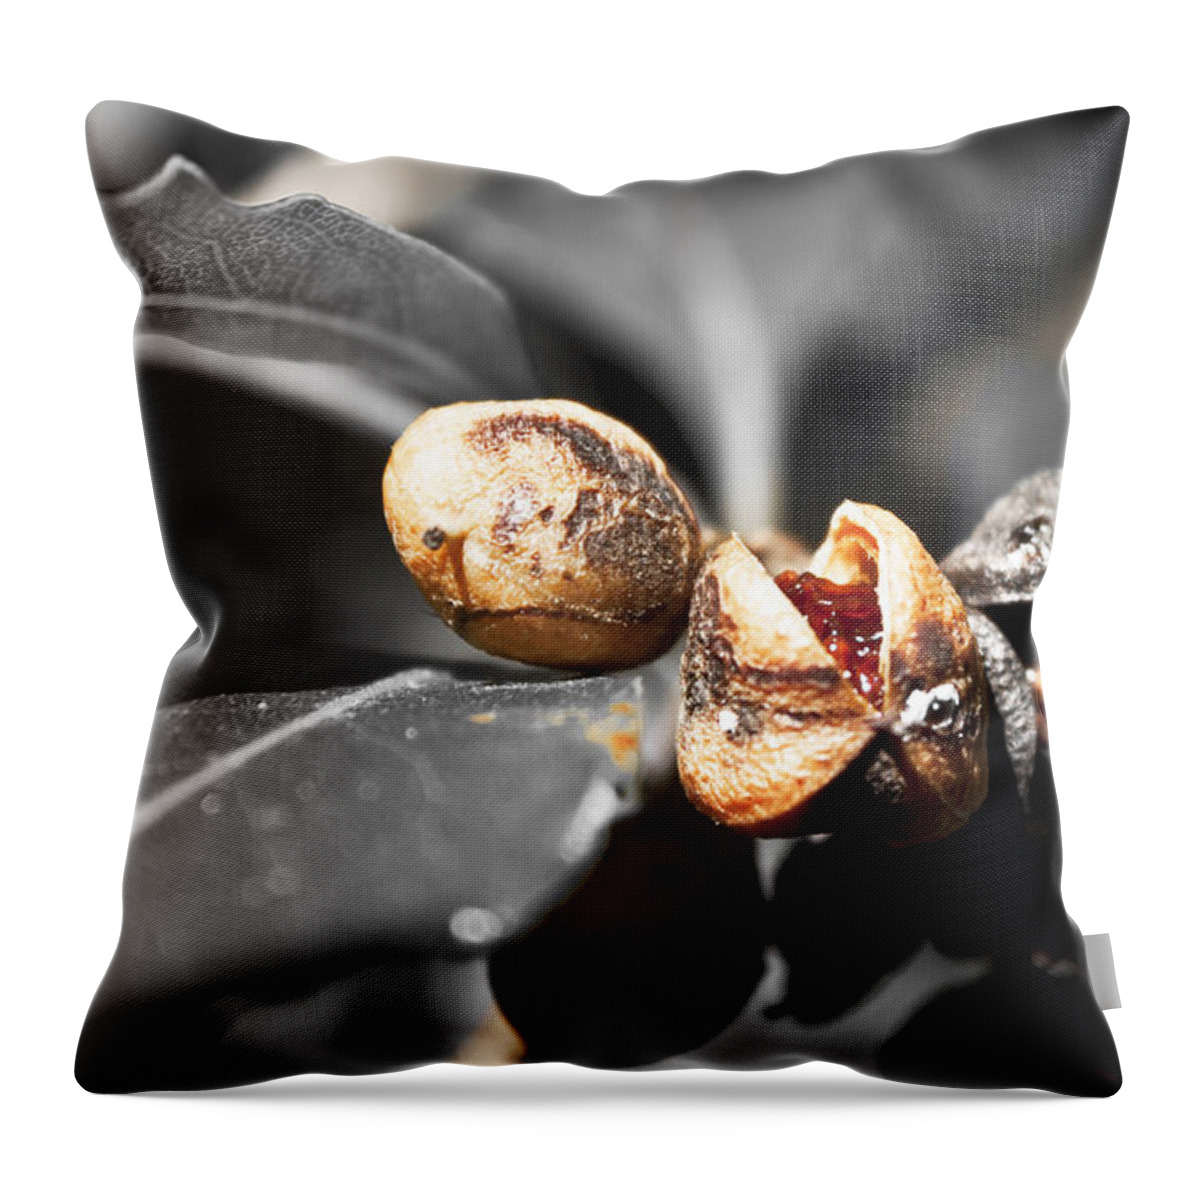 Seeds Throw Pillow featuring the photograph Knew seeds of complentation by Miroslava Jurcik